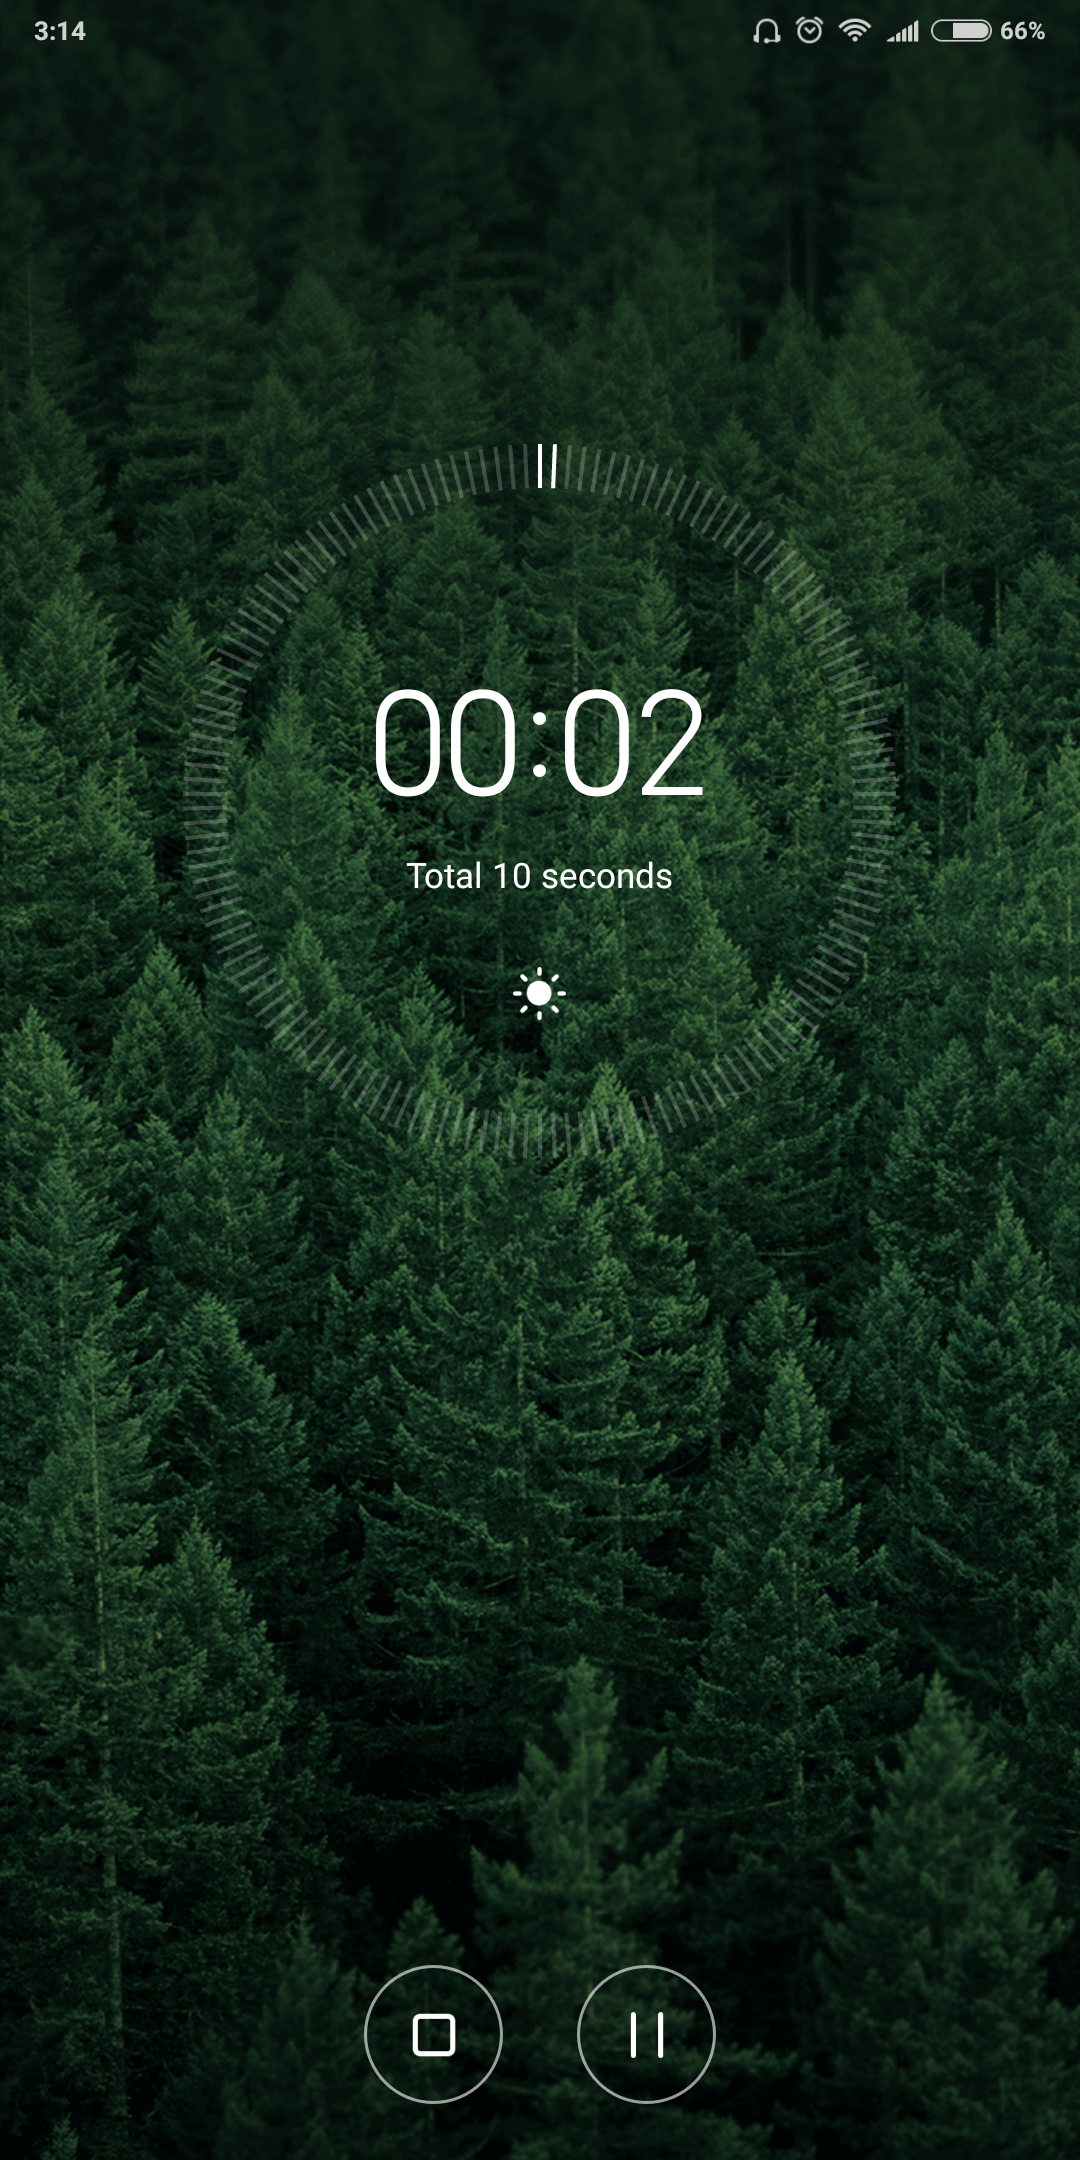 Can Someone Find Me This Forest Wallpaper Without That Clock Stuff